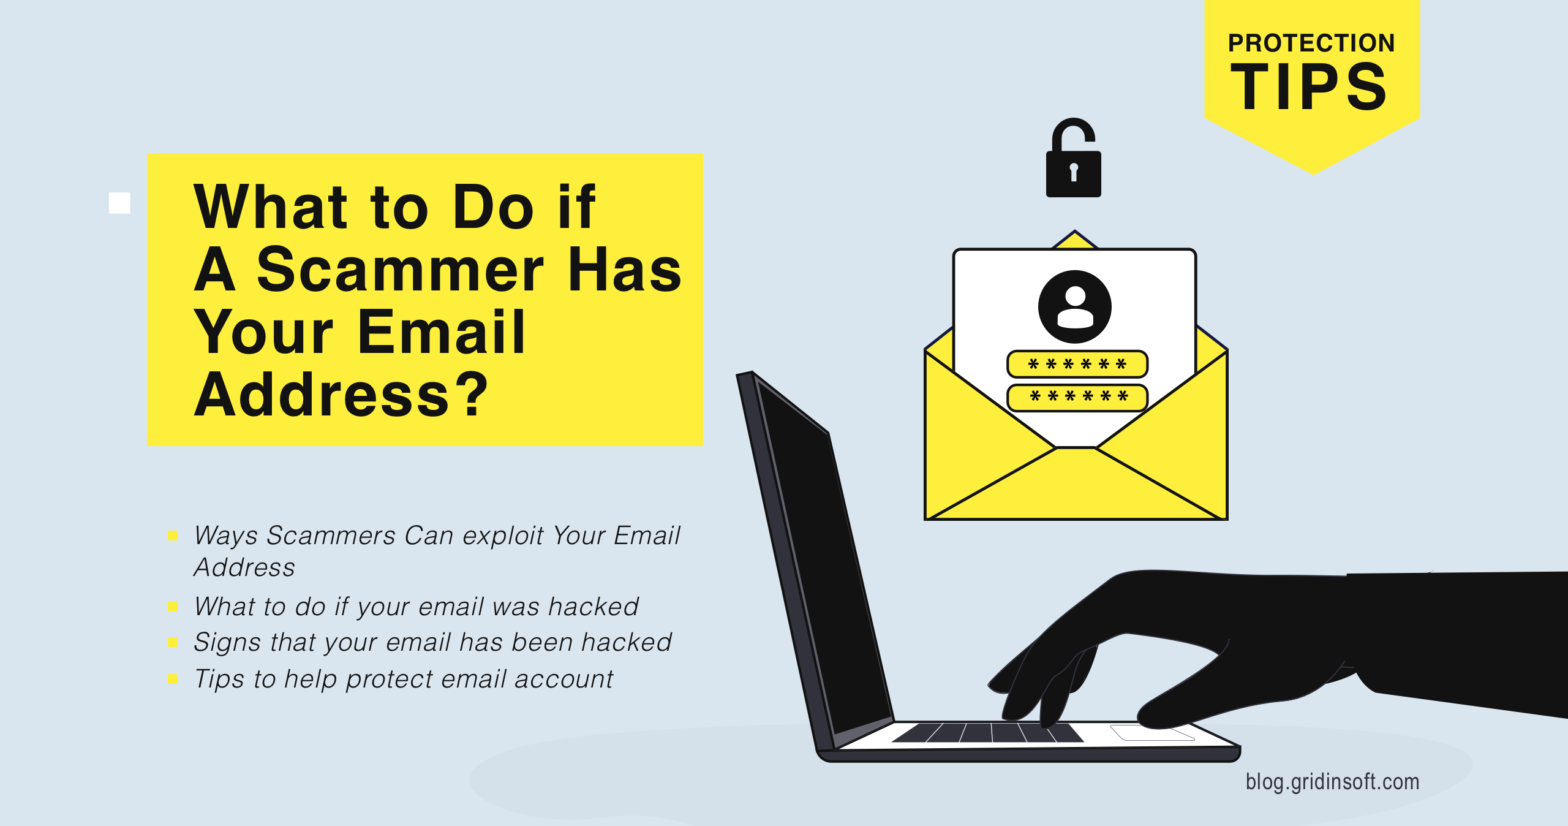 What to Do if A Scammer Has Your Email Address?